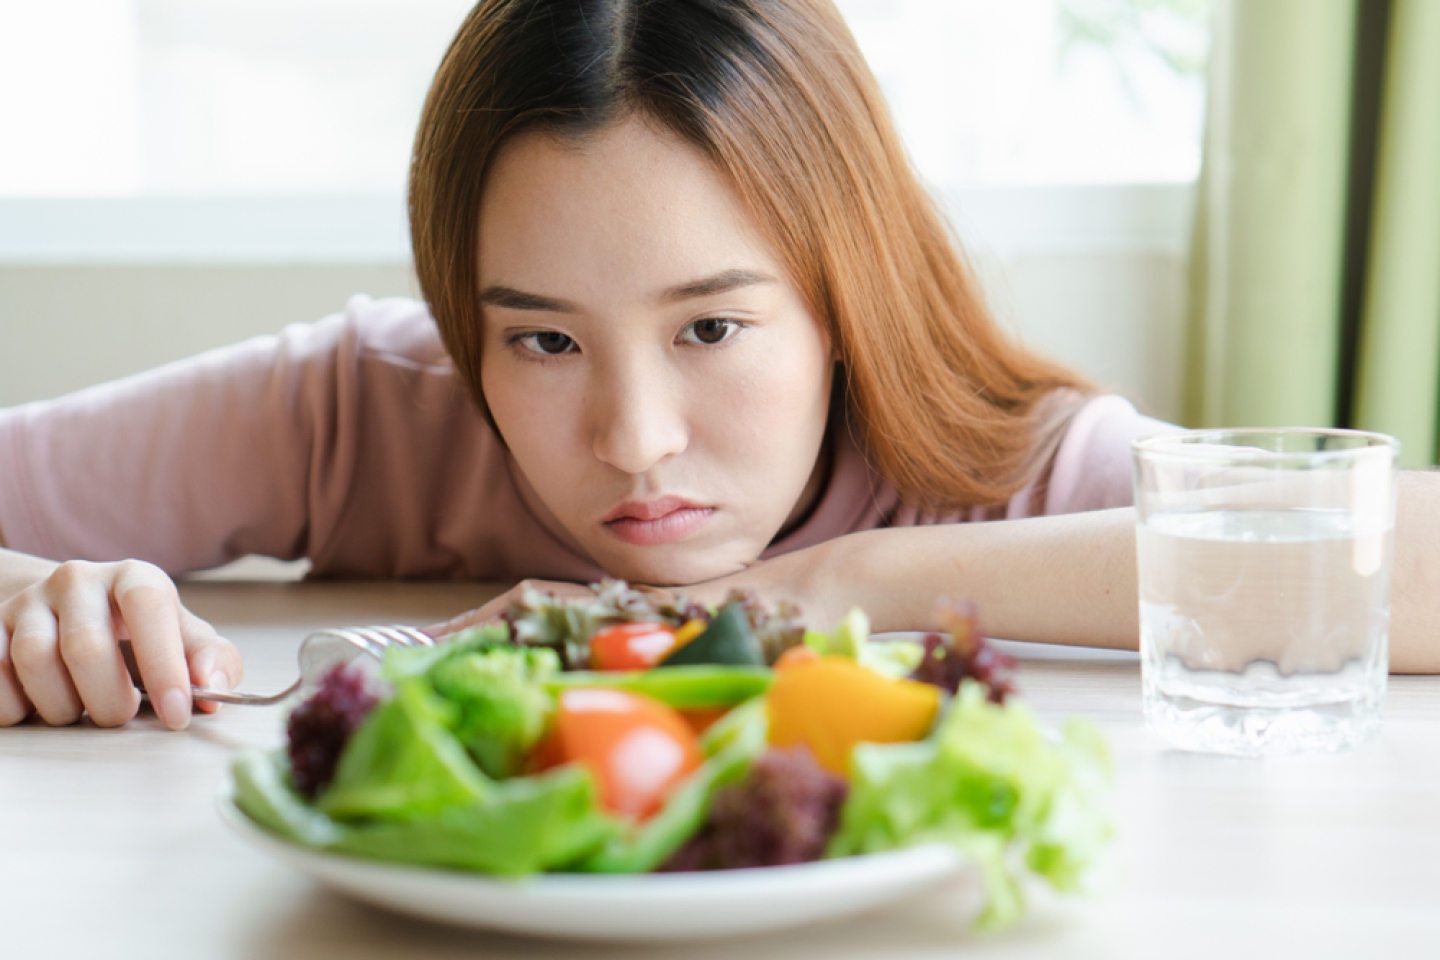 5 Underlying Factors That Contribute to the Development of Eating Disorders